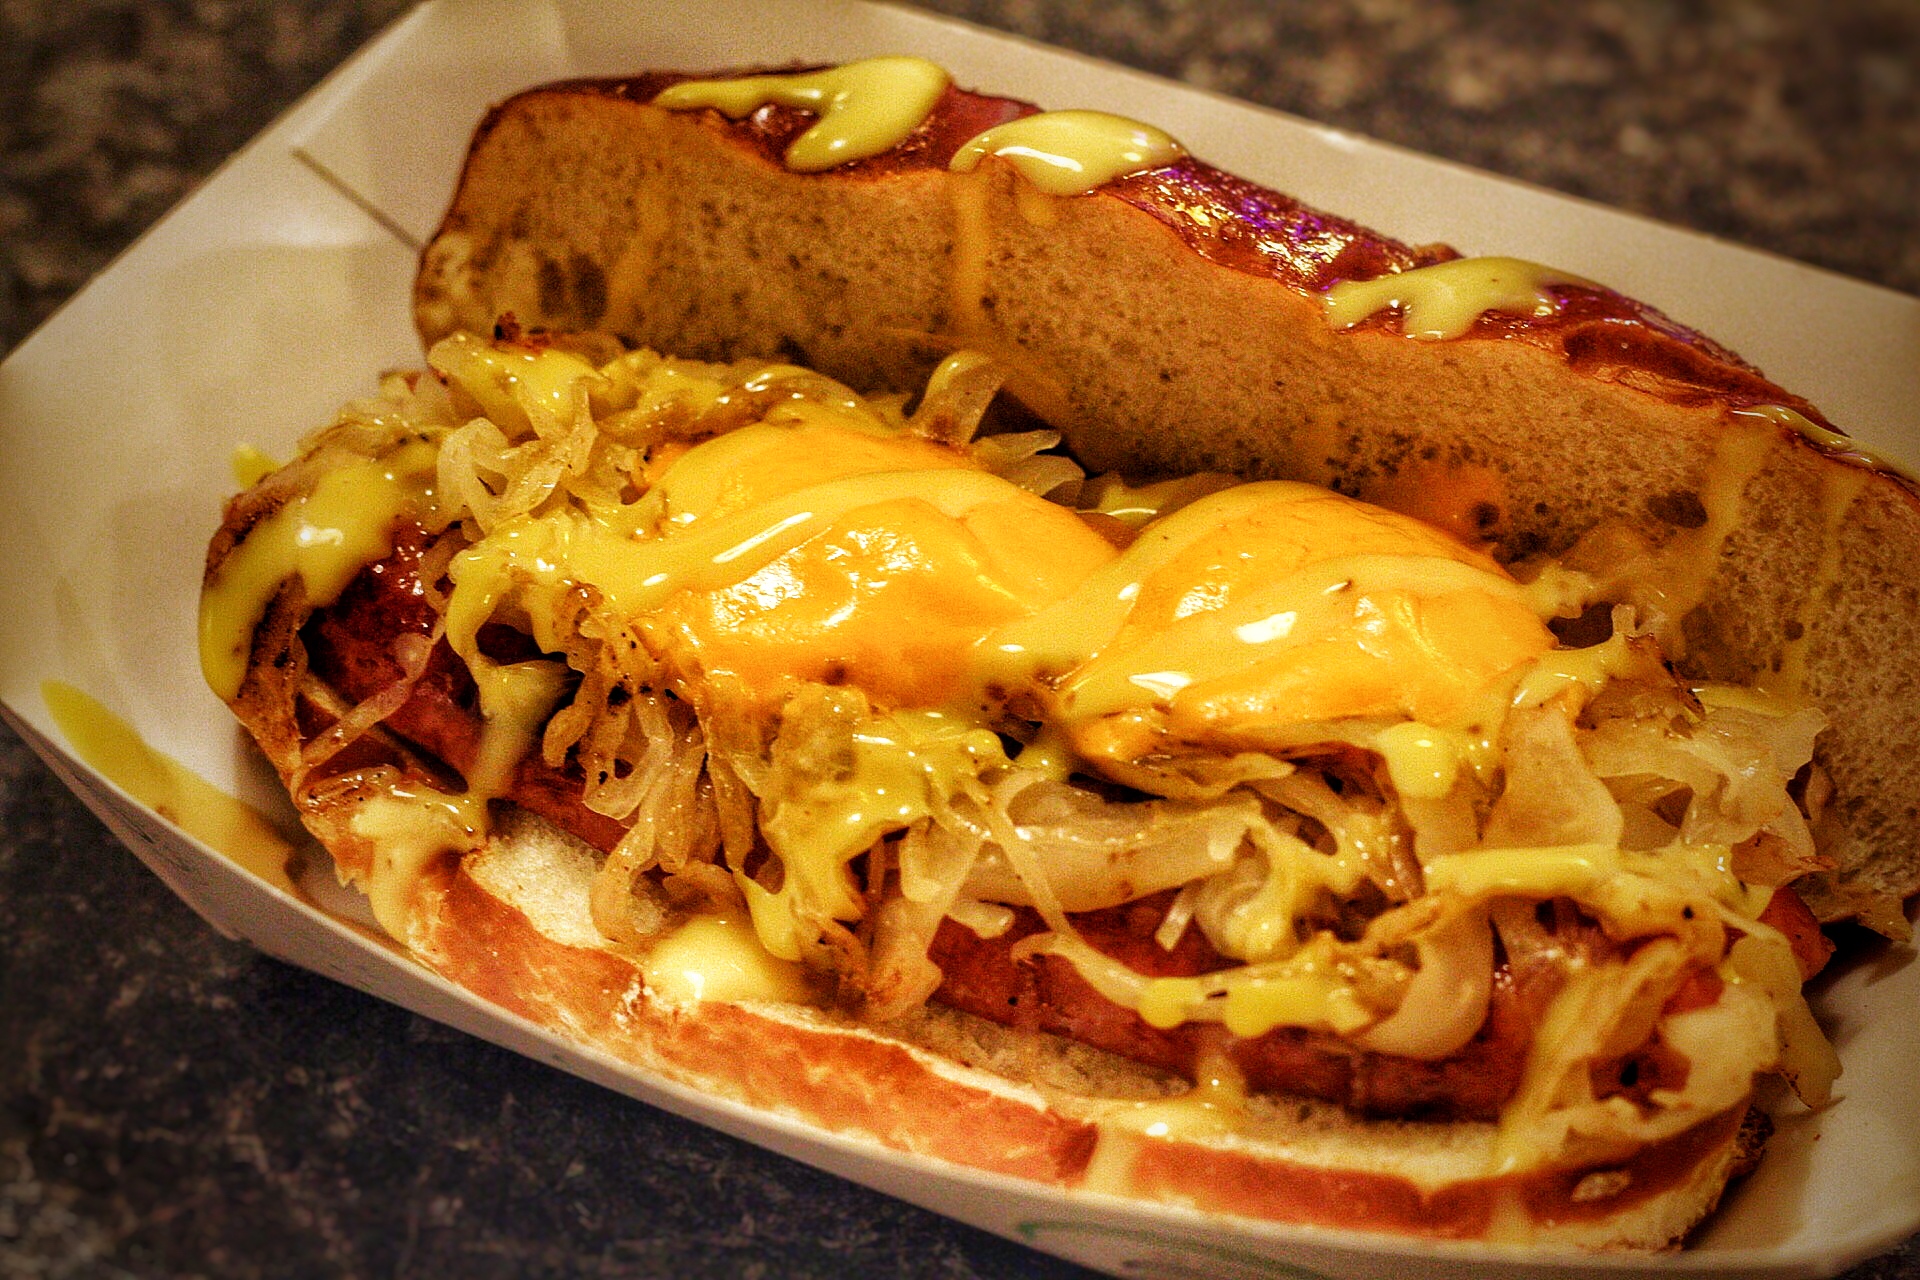 Pictured here: Don’t Hassle the Hoff Wiener featuring Smith’s Cheddarbest, Kraut, Horsey Cheddar Sauce, Honey Mustard on a Buttery, Salted Pretzel Bun.